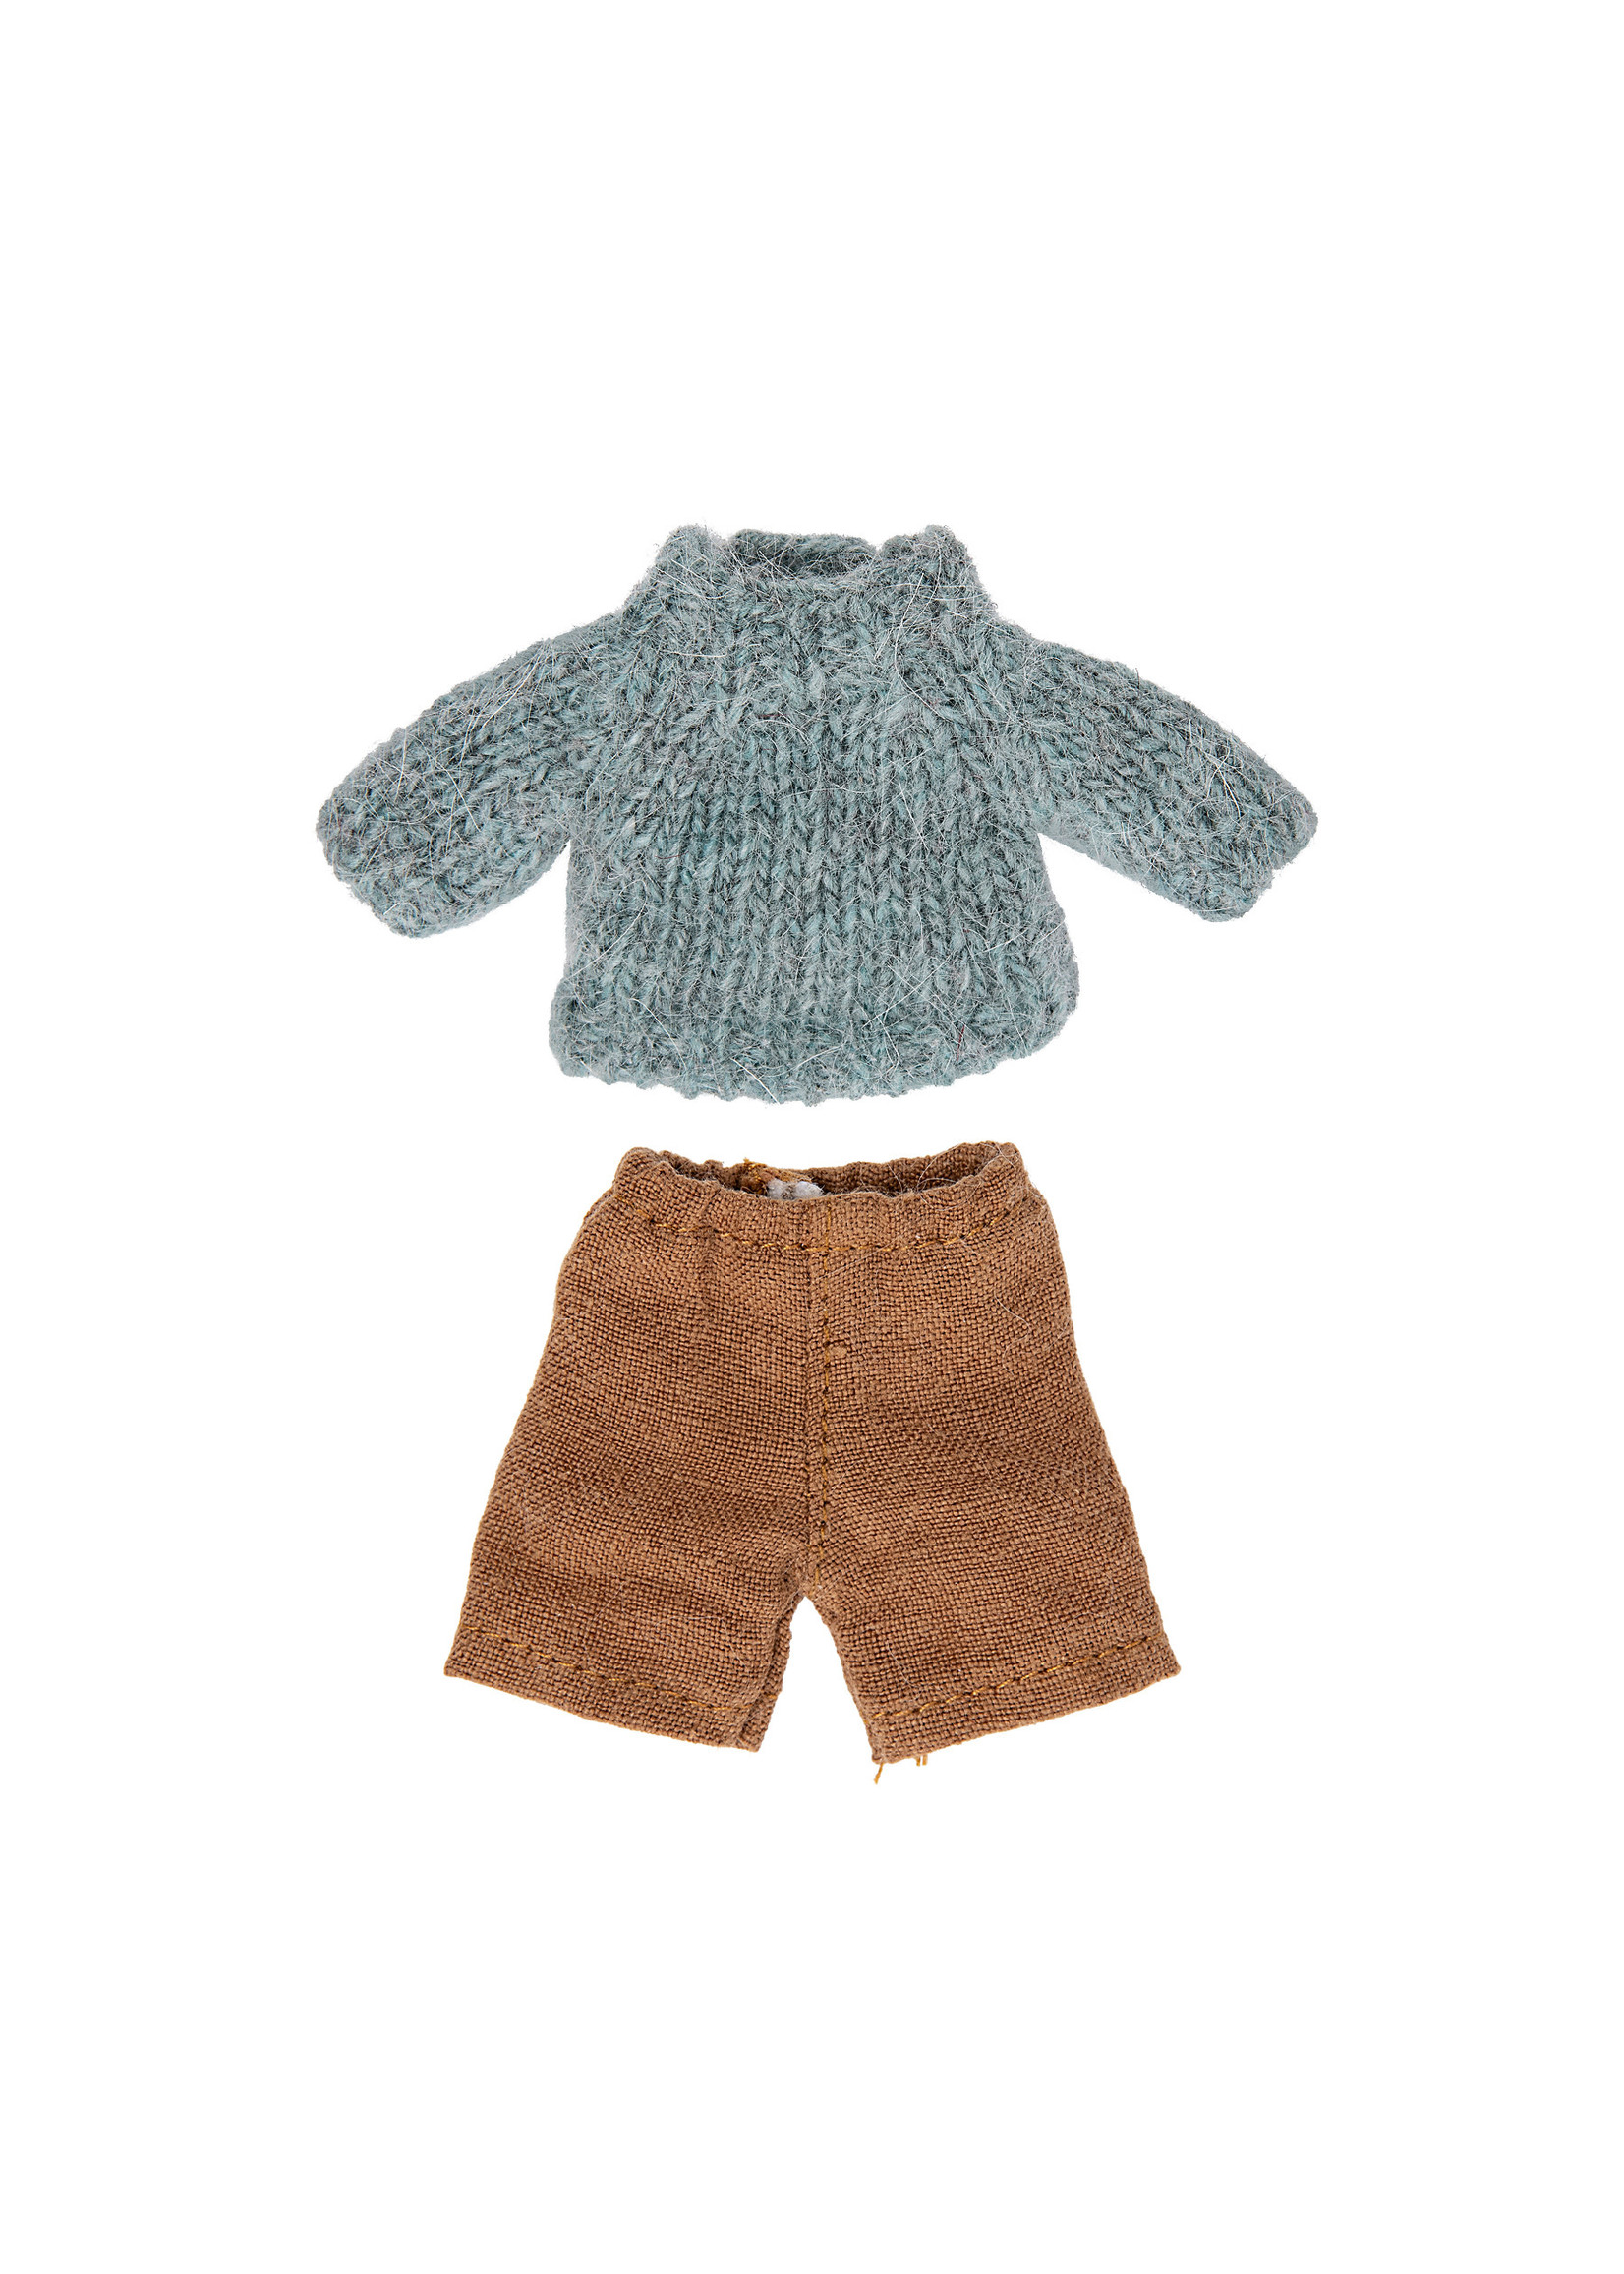 Maileg Big Brother Clothes - Knitted Sweater & Pants